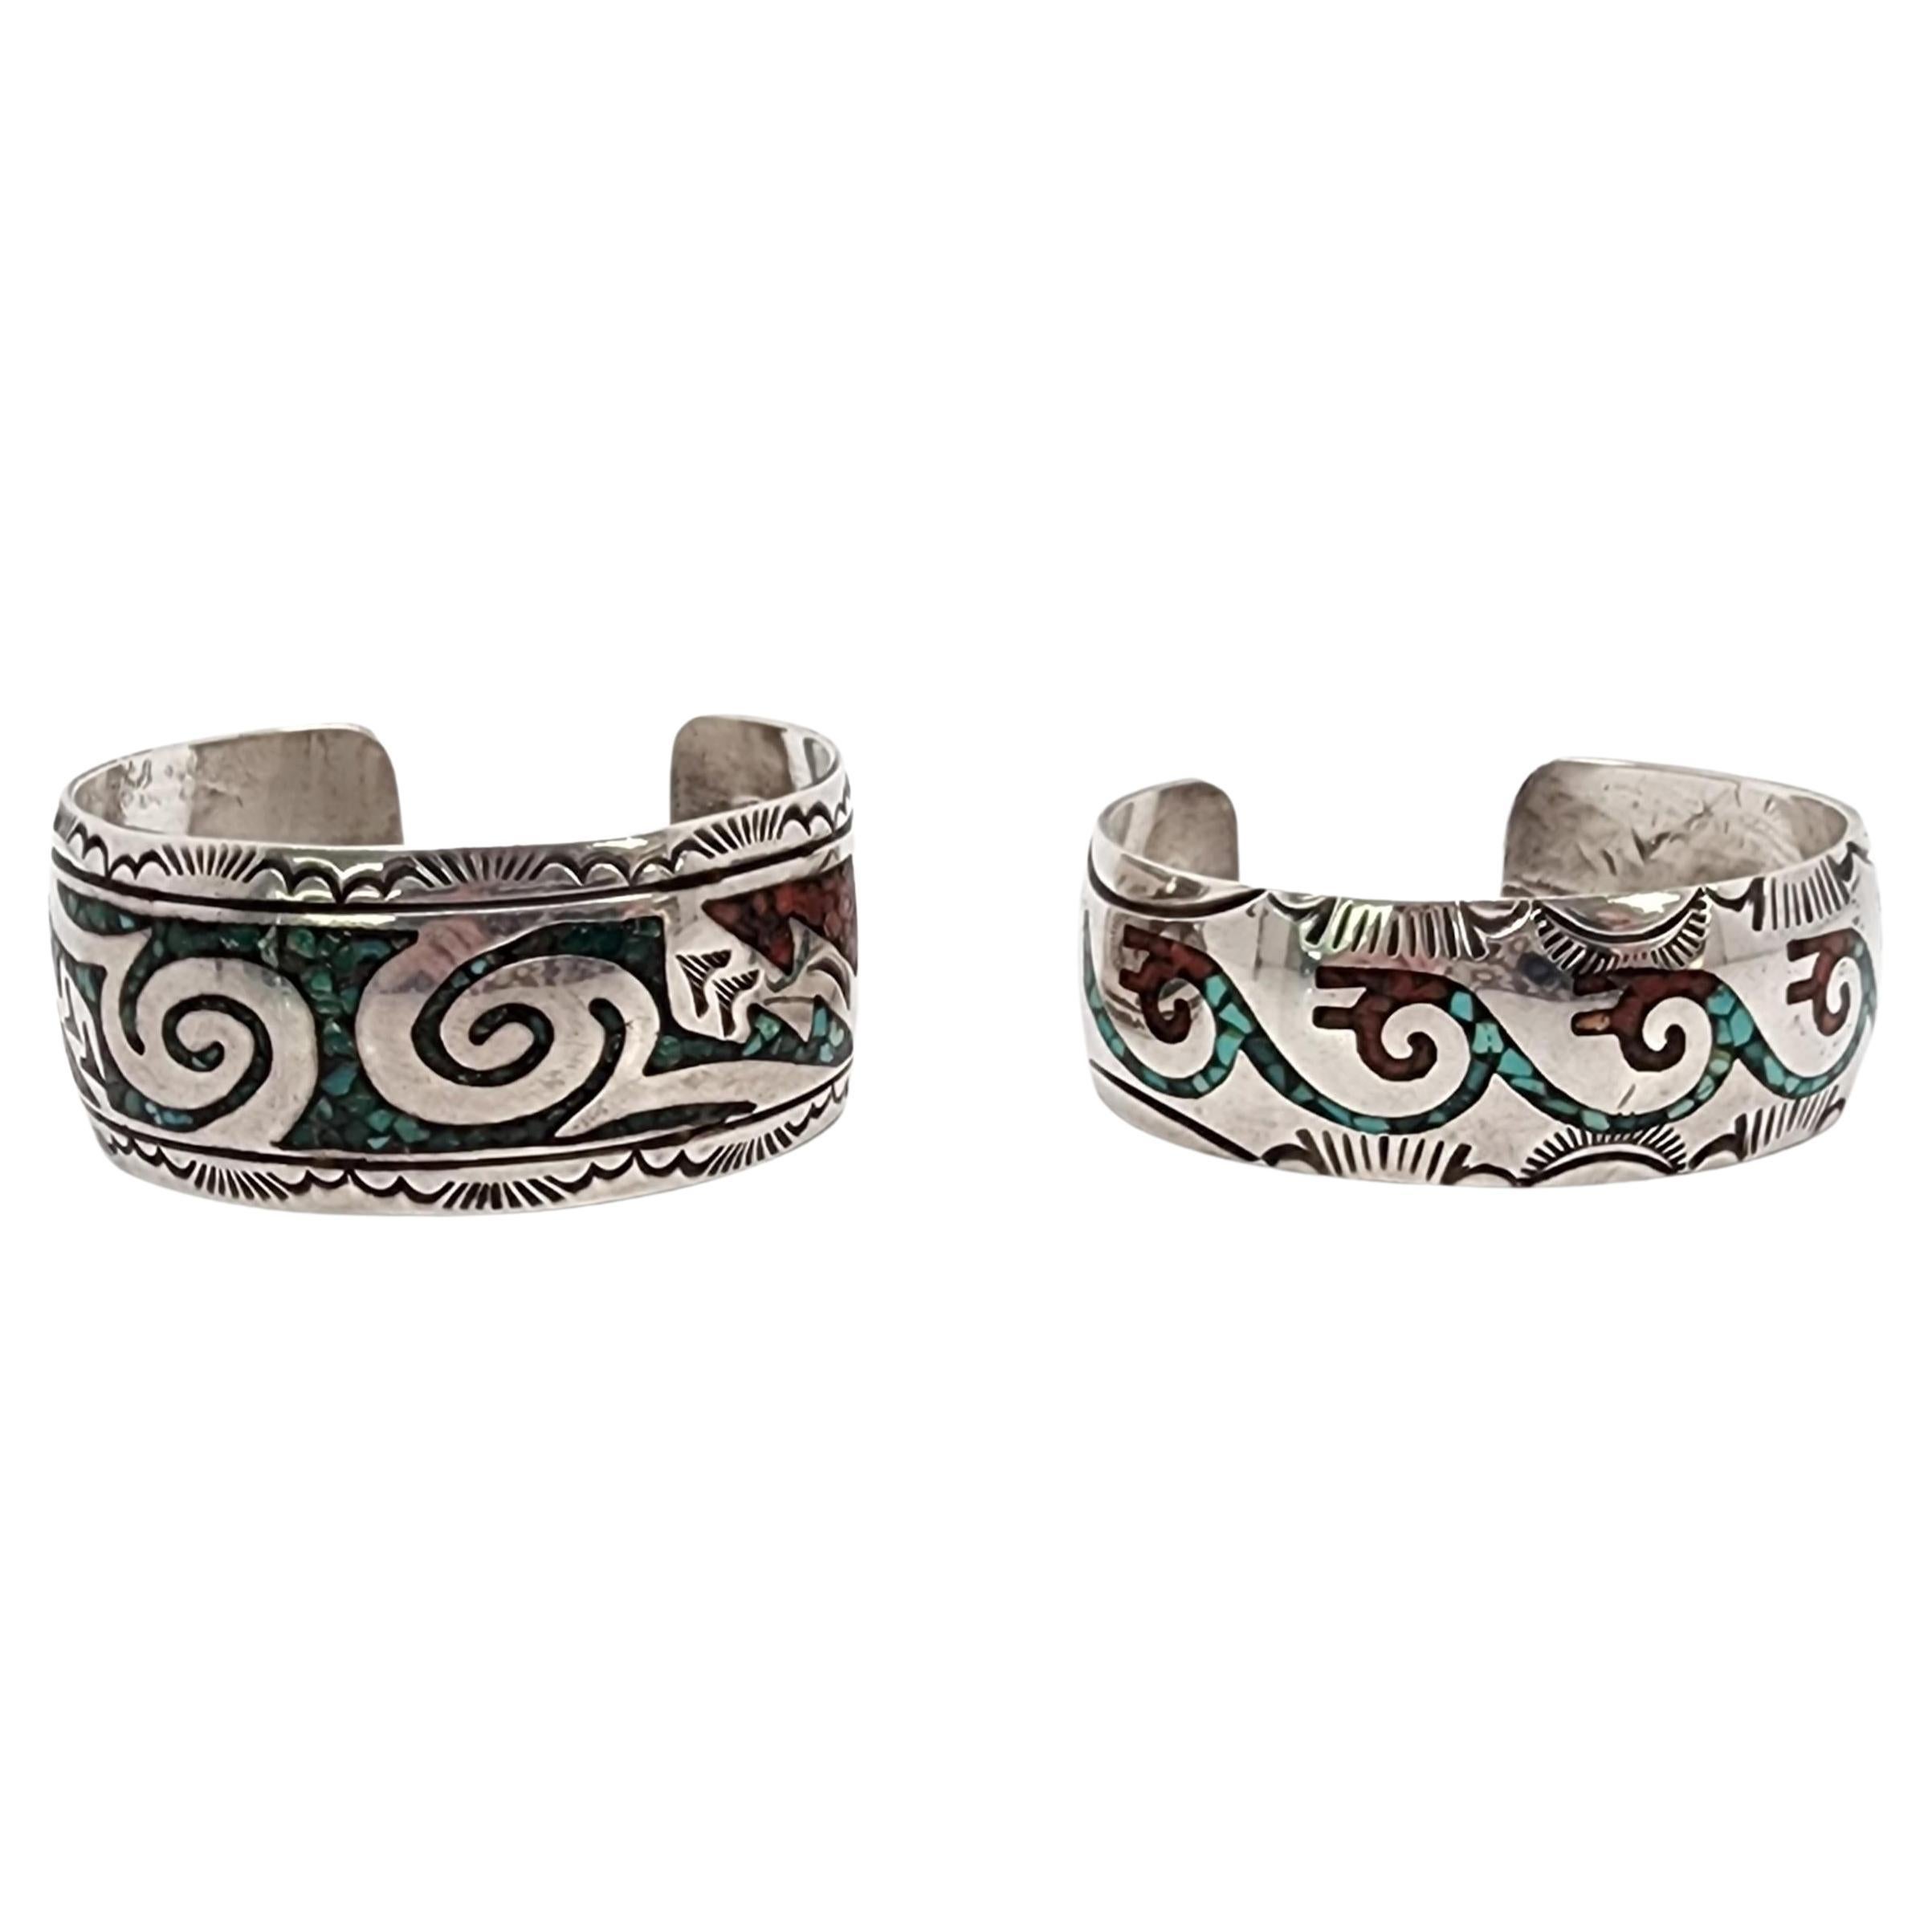 Set of 2 Native American Crushed Turquoise Silver Cuff Bracelets #15358